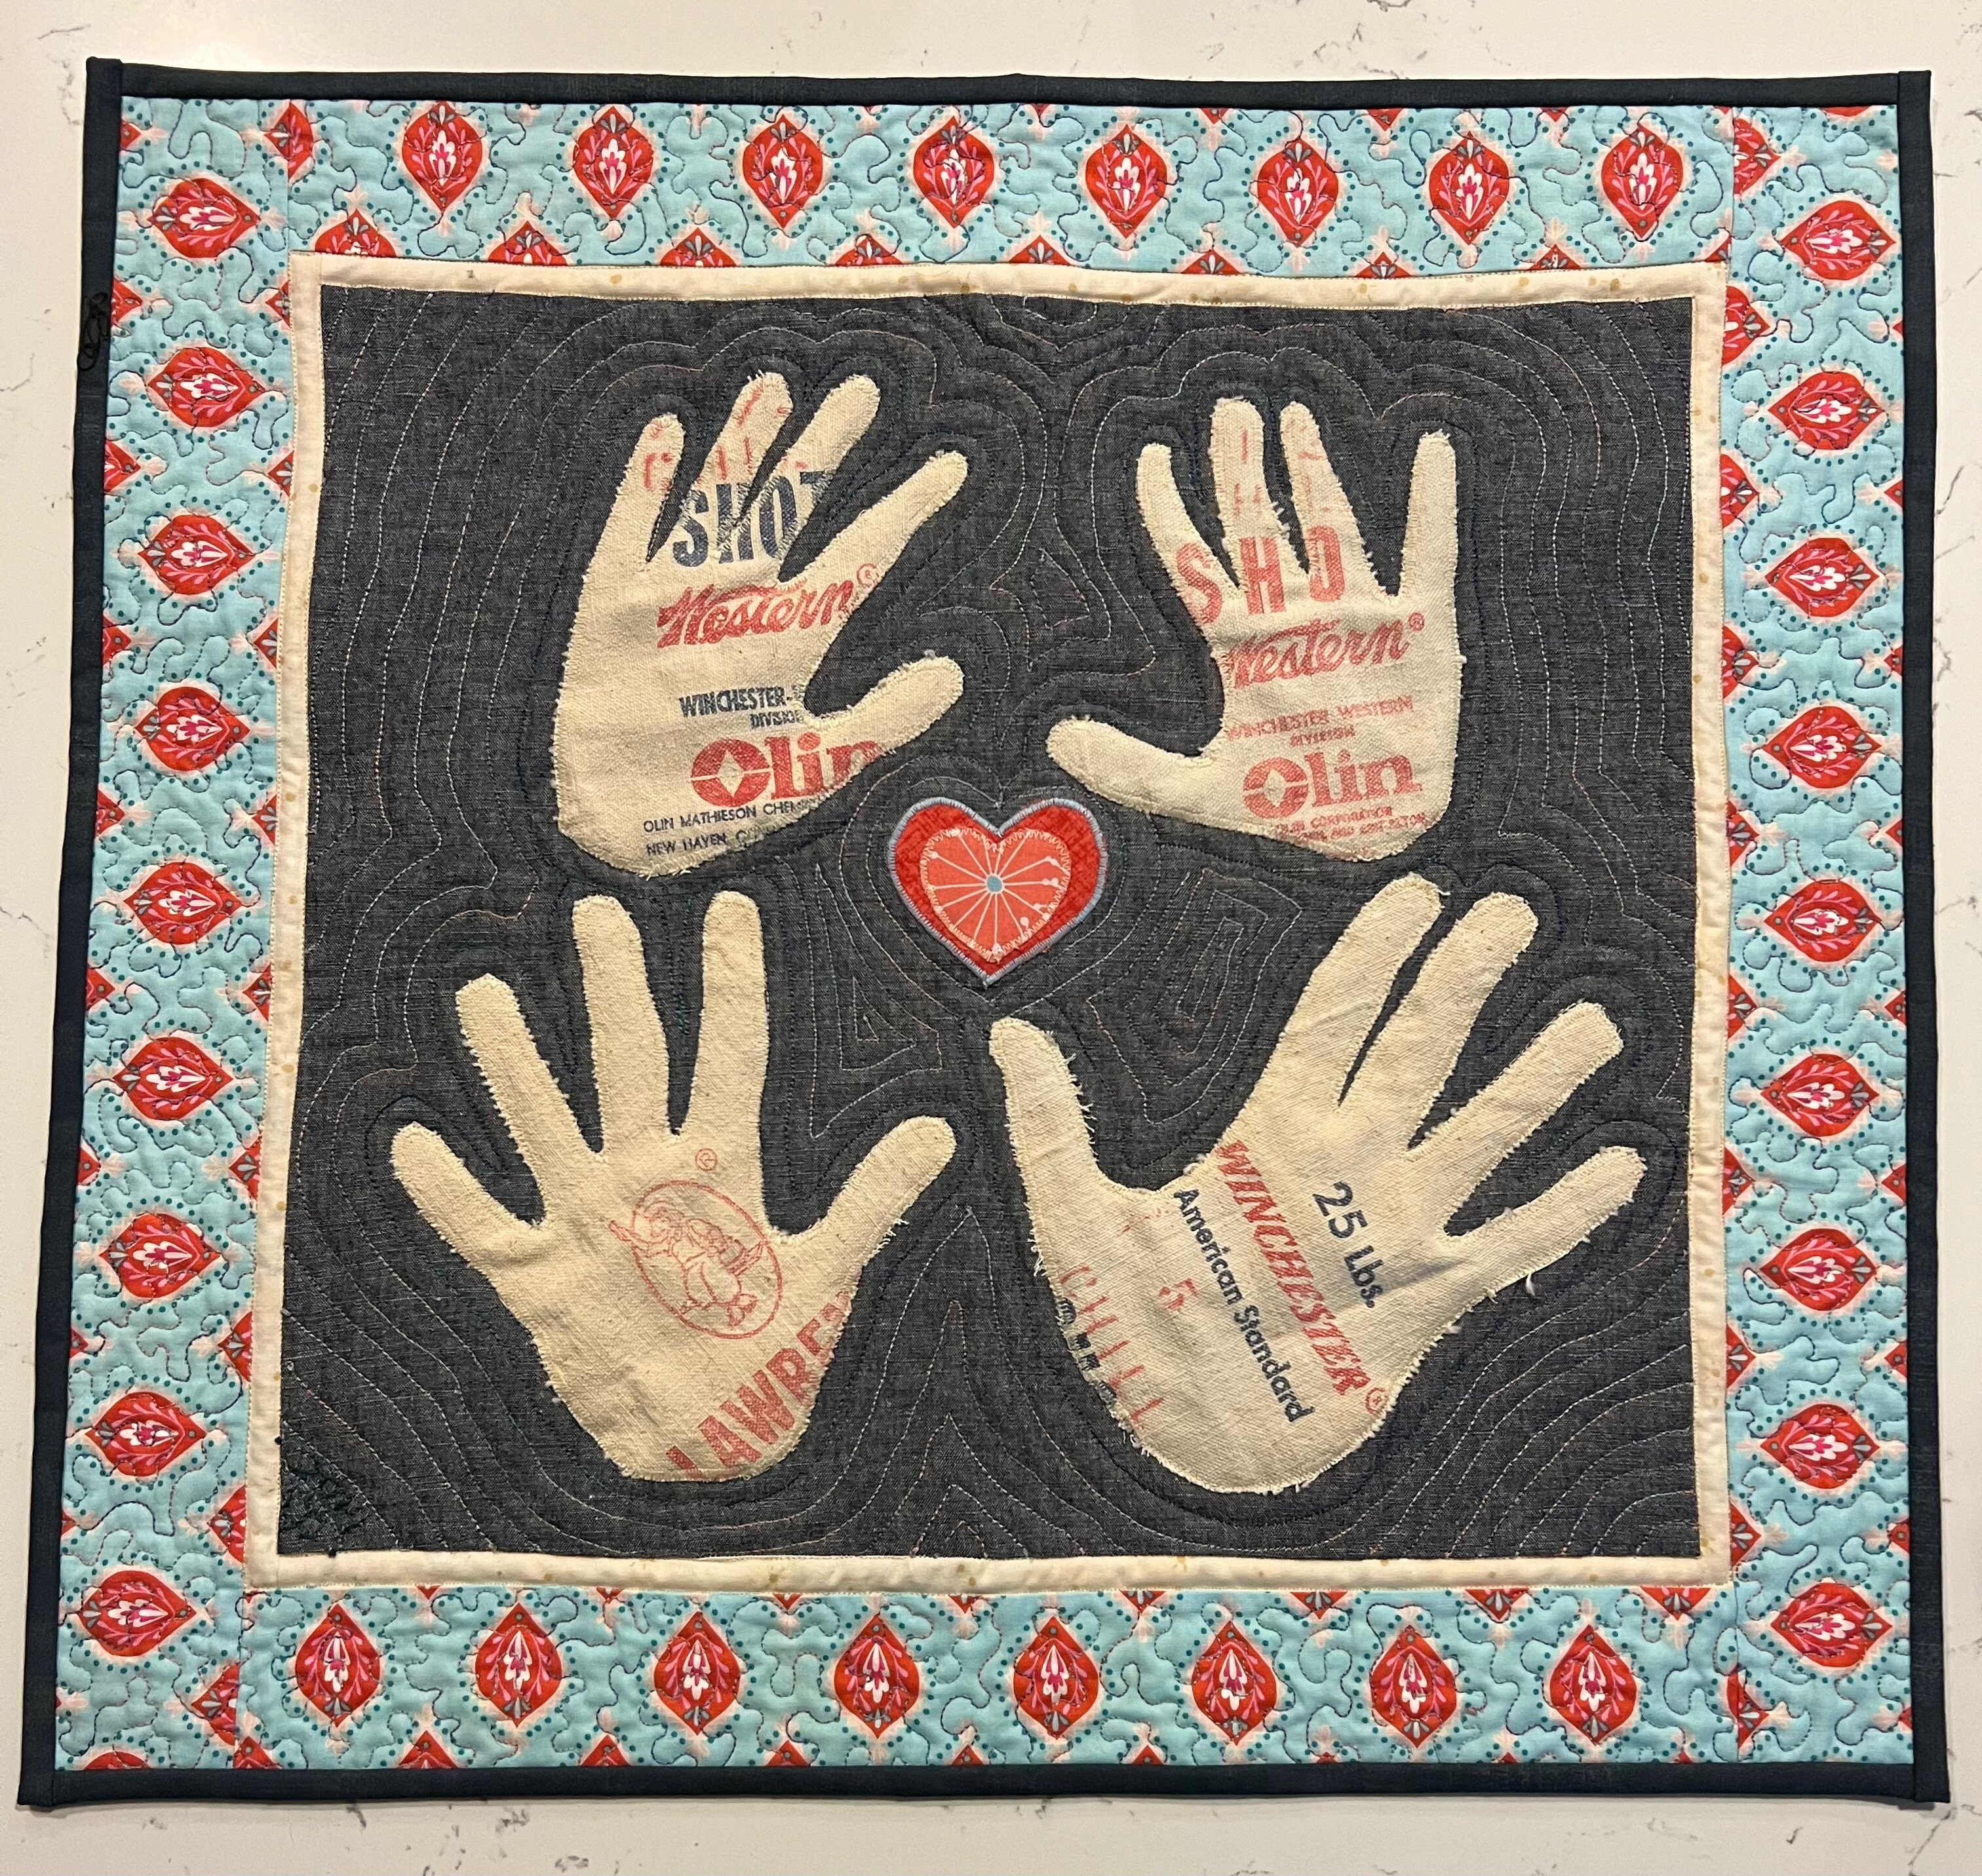 A quilt made by Christine Paul, featuring the handprints of the family it was made for.